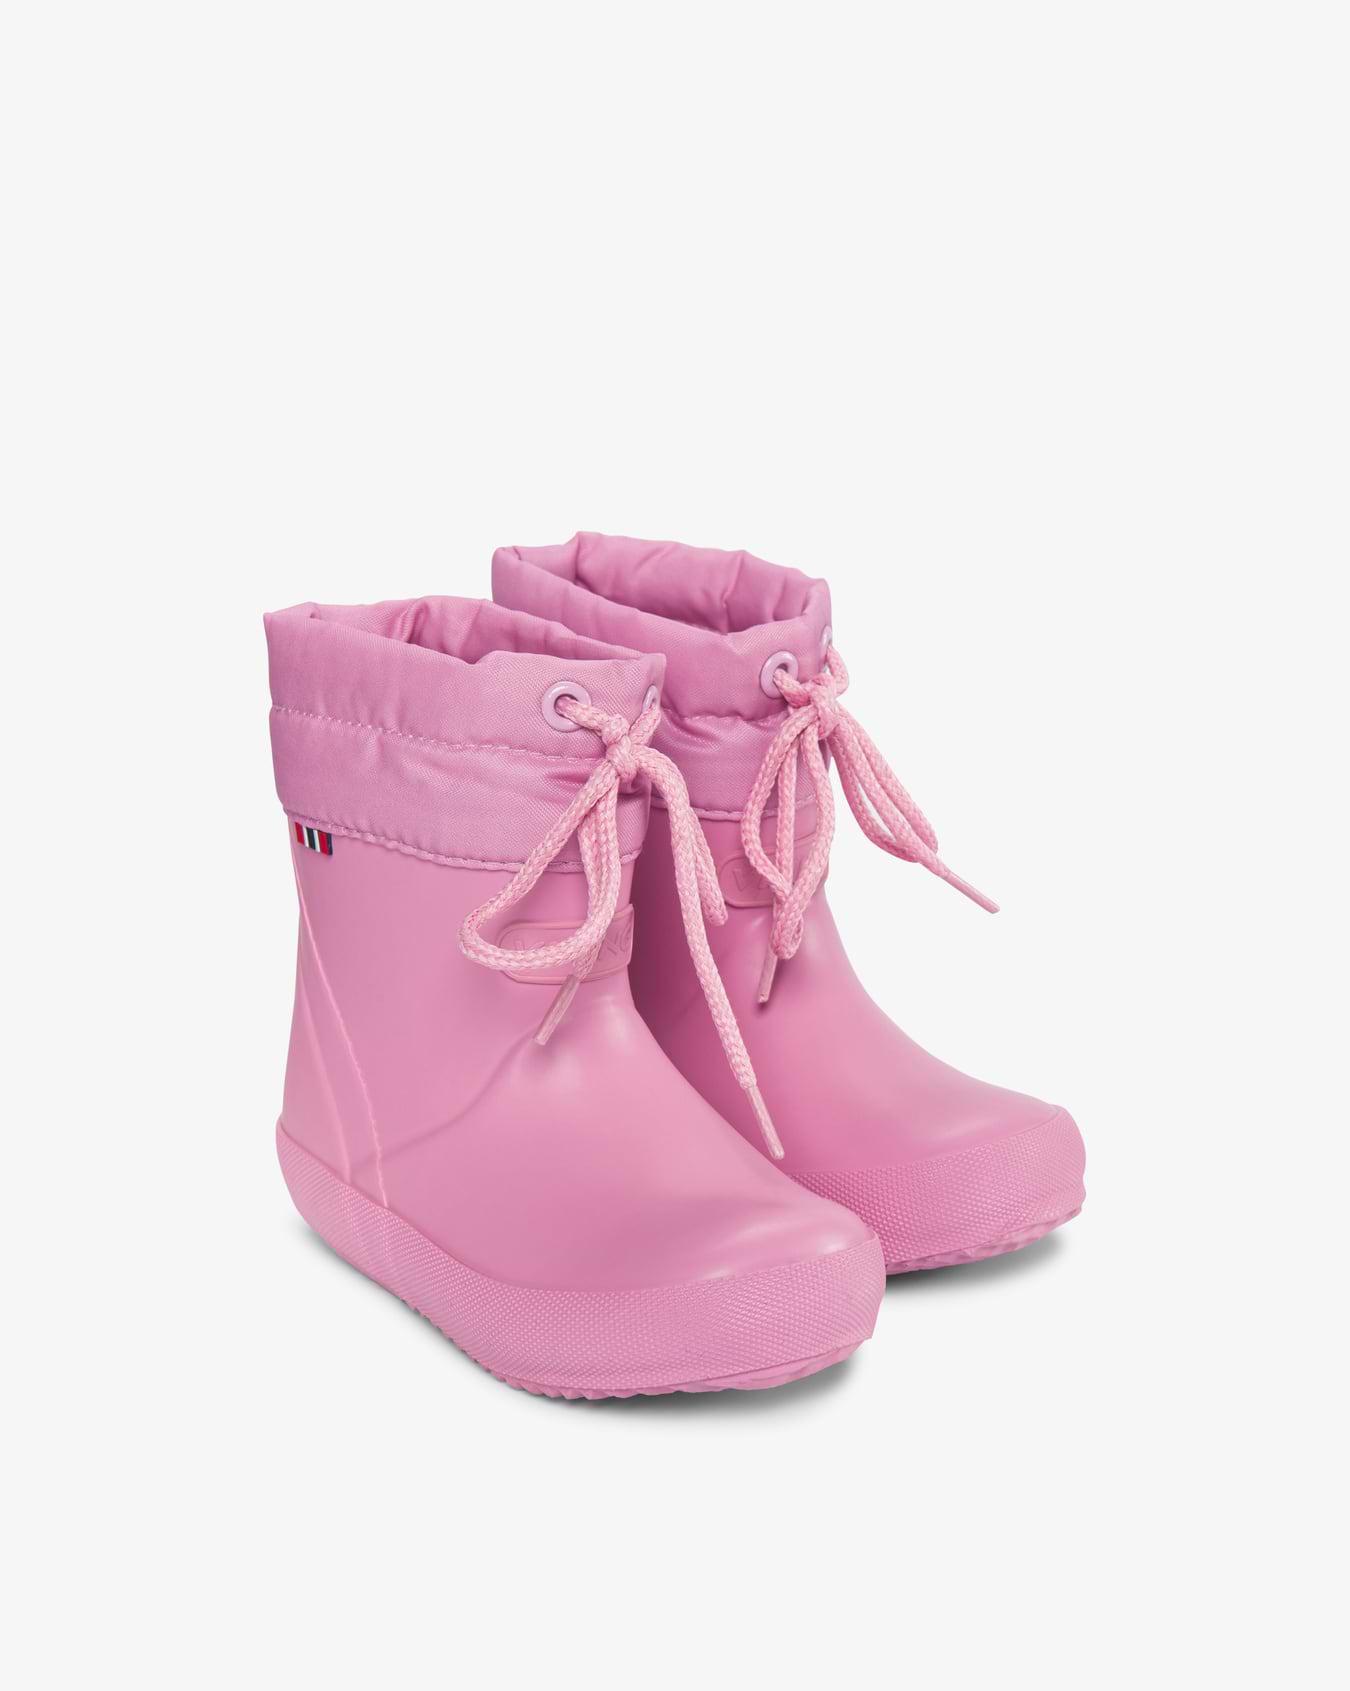 Alv Indie Kids Rubber Boots